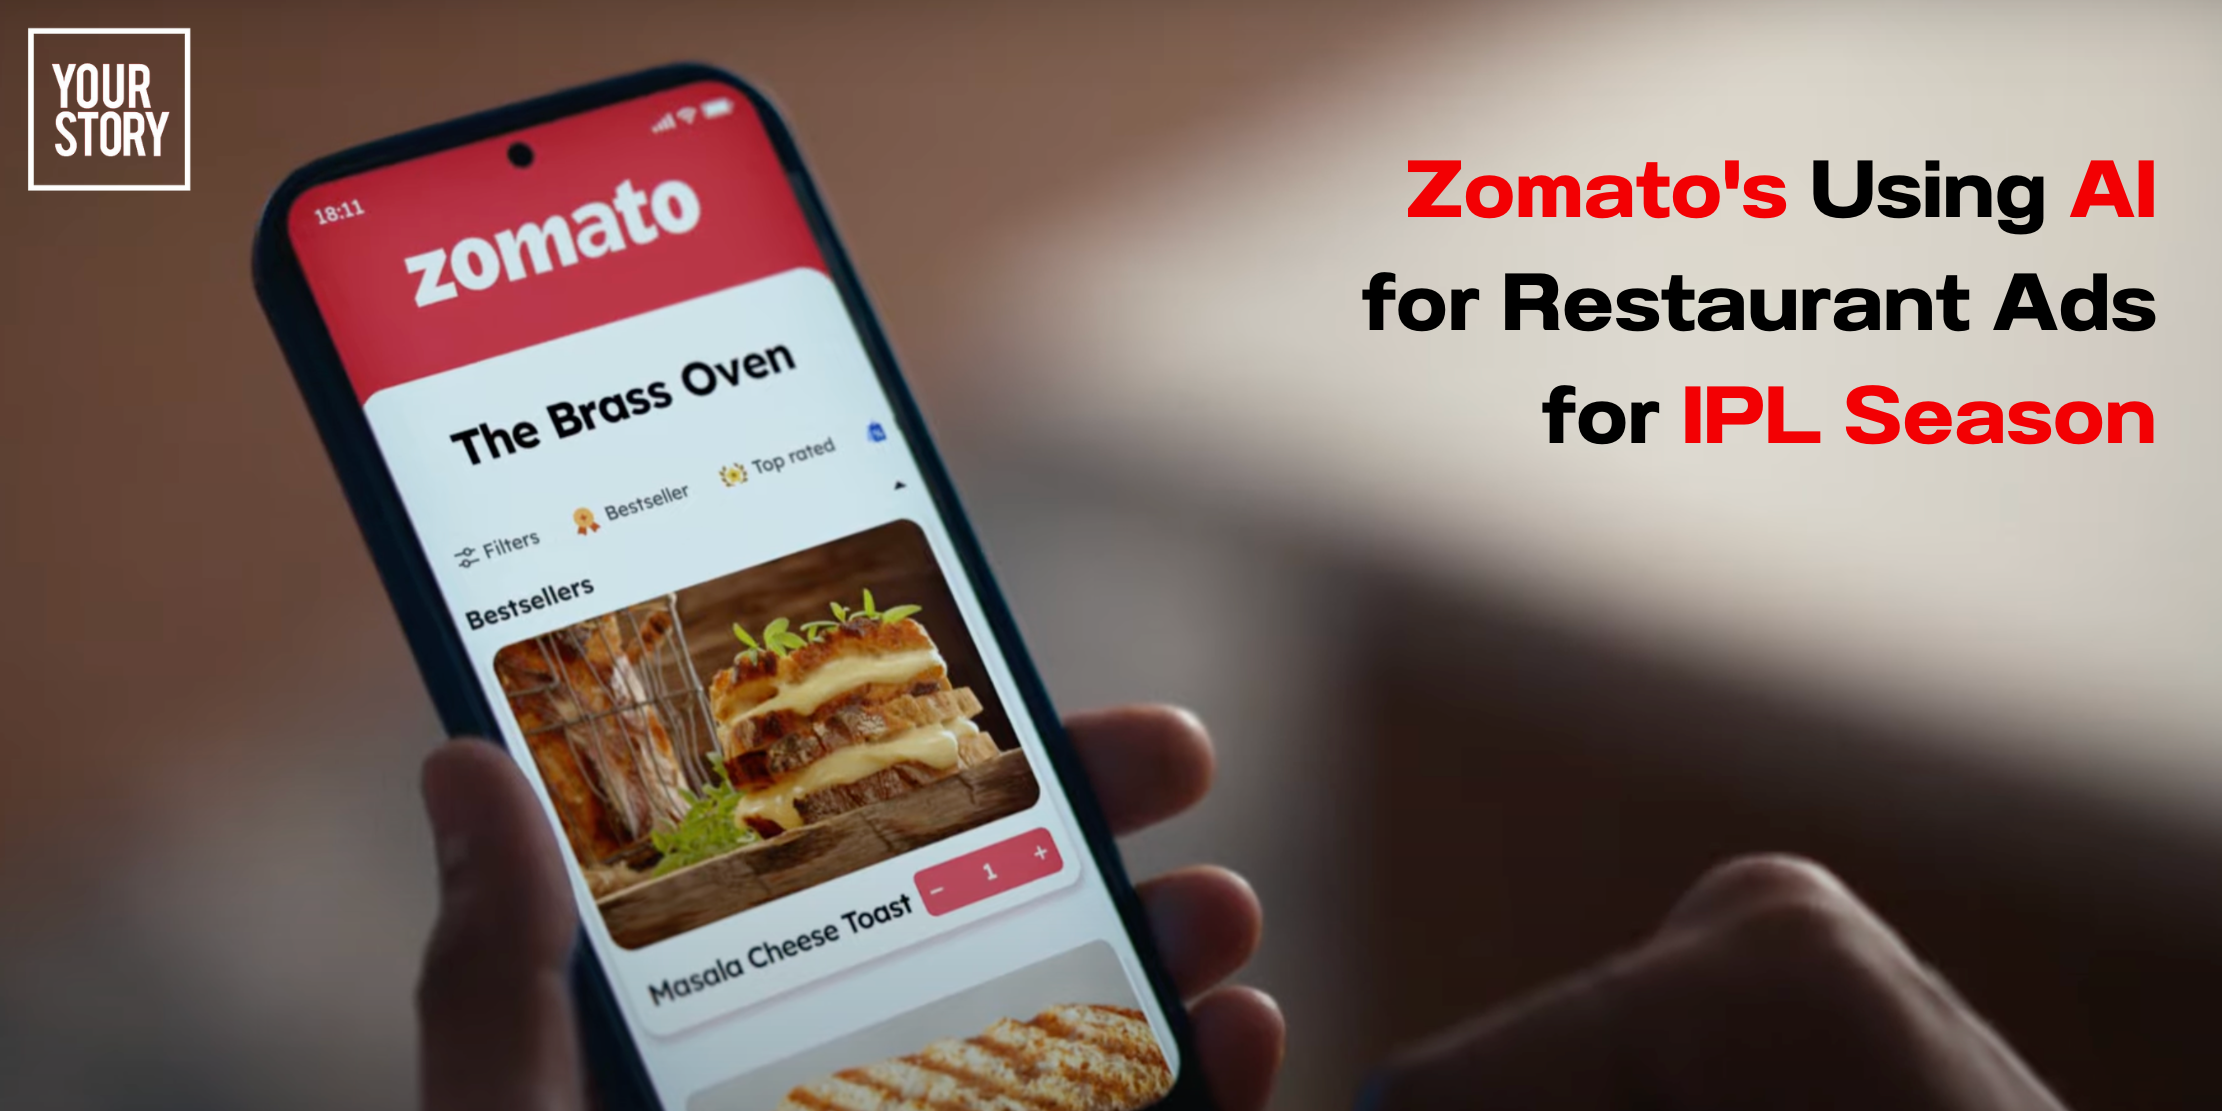 Zomato's Using AI to Cook Up Restaurant Ads for IPL Season